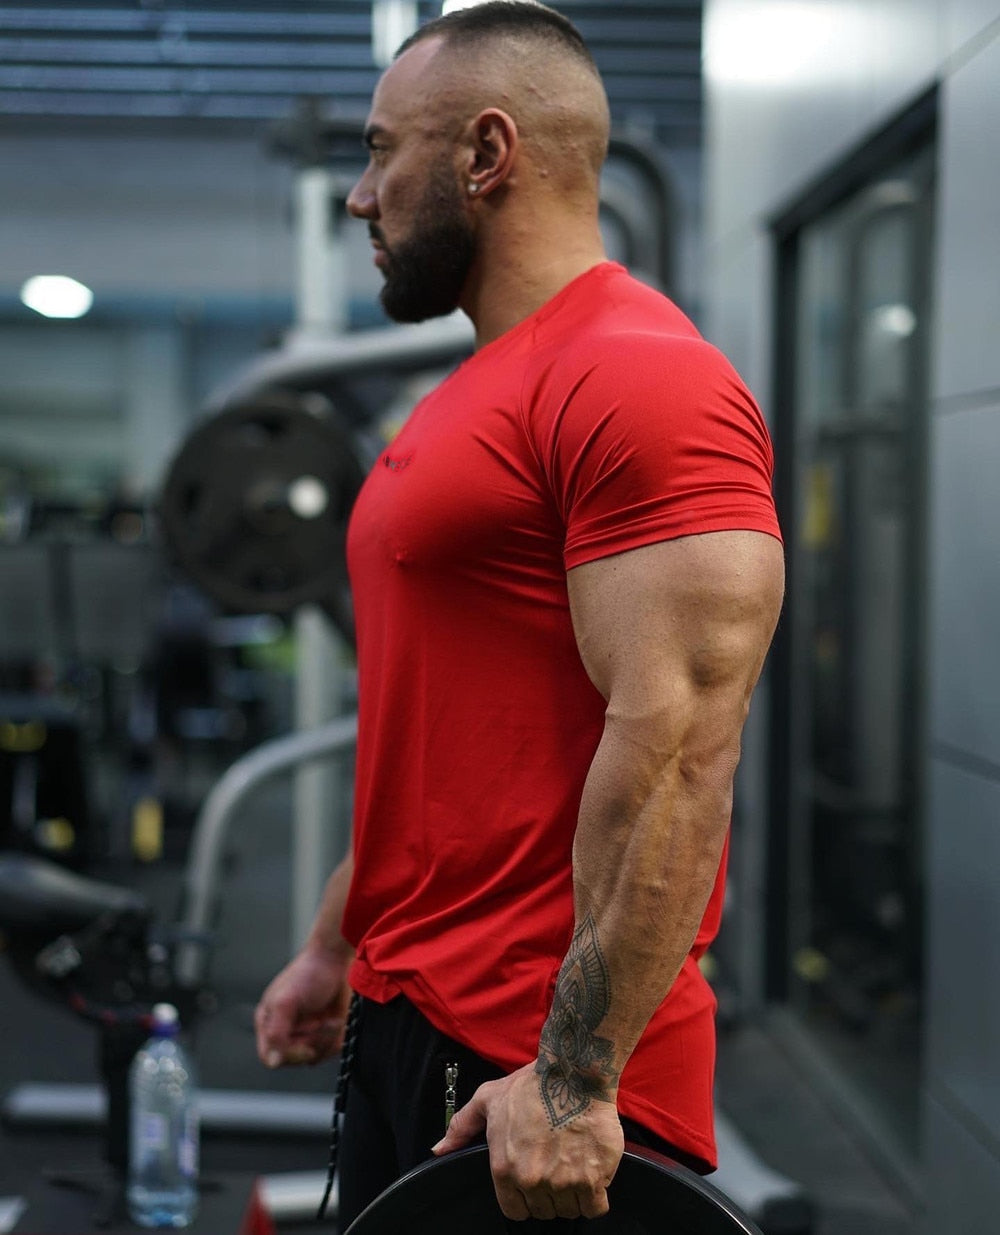 Red Loose Casual T-shirt Men Cotton Short Sleeve Shirt Male Gym Fitness Tees Tops Summer Sport Training Crossfit Brand Clothing